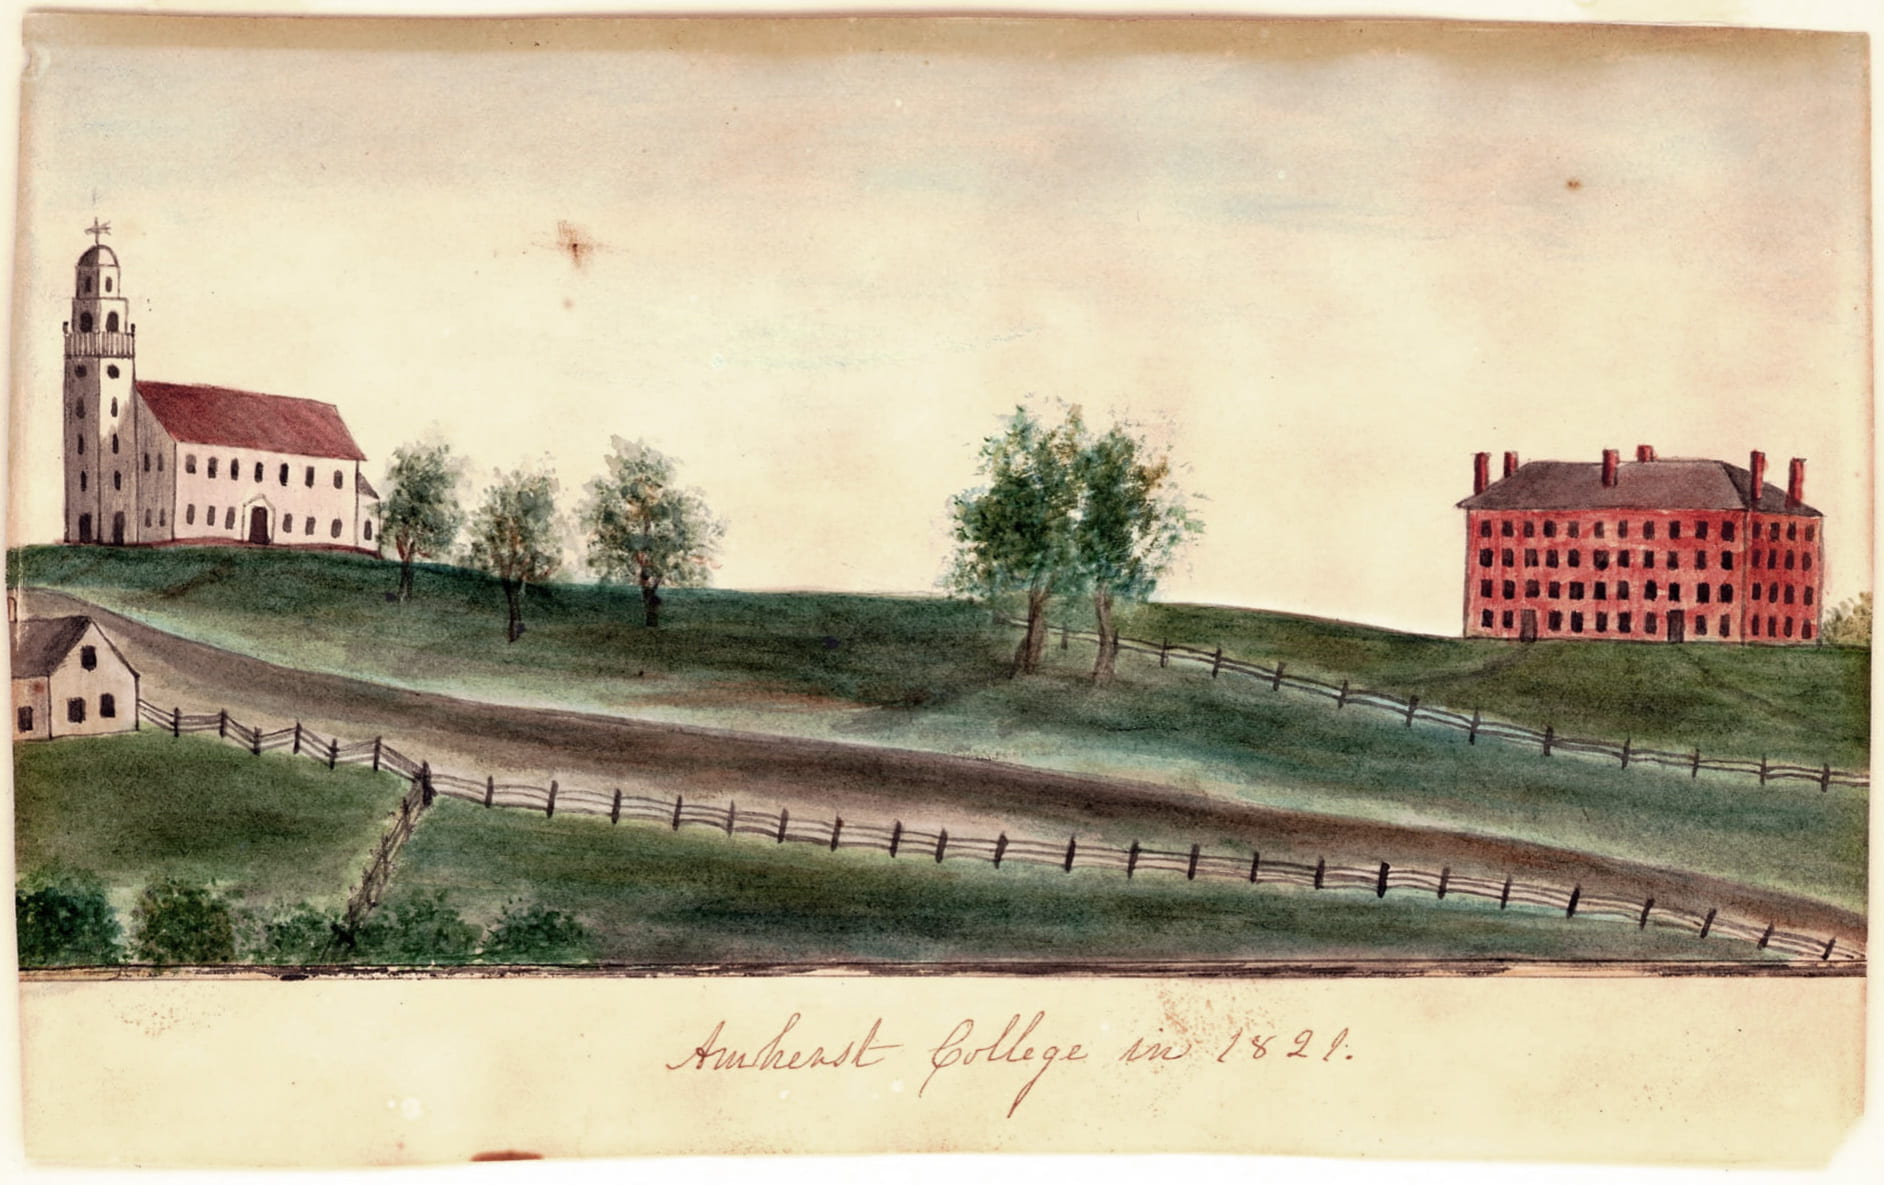 Amherst College in 1821